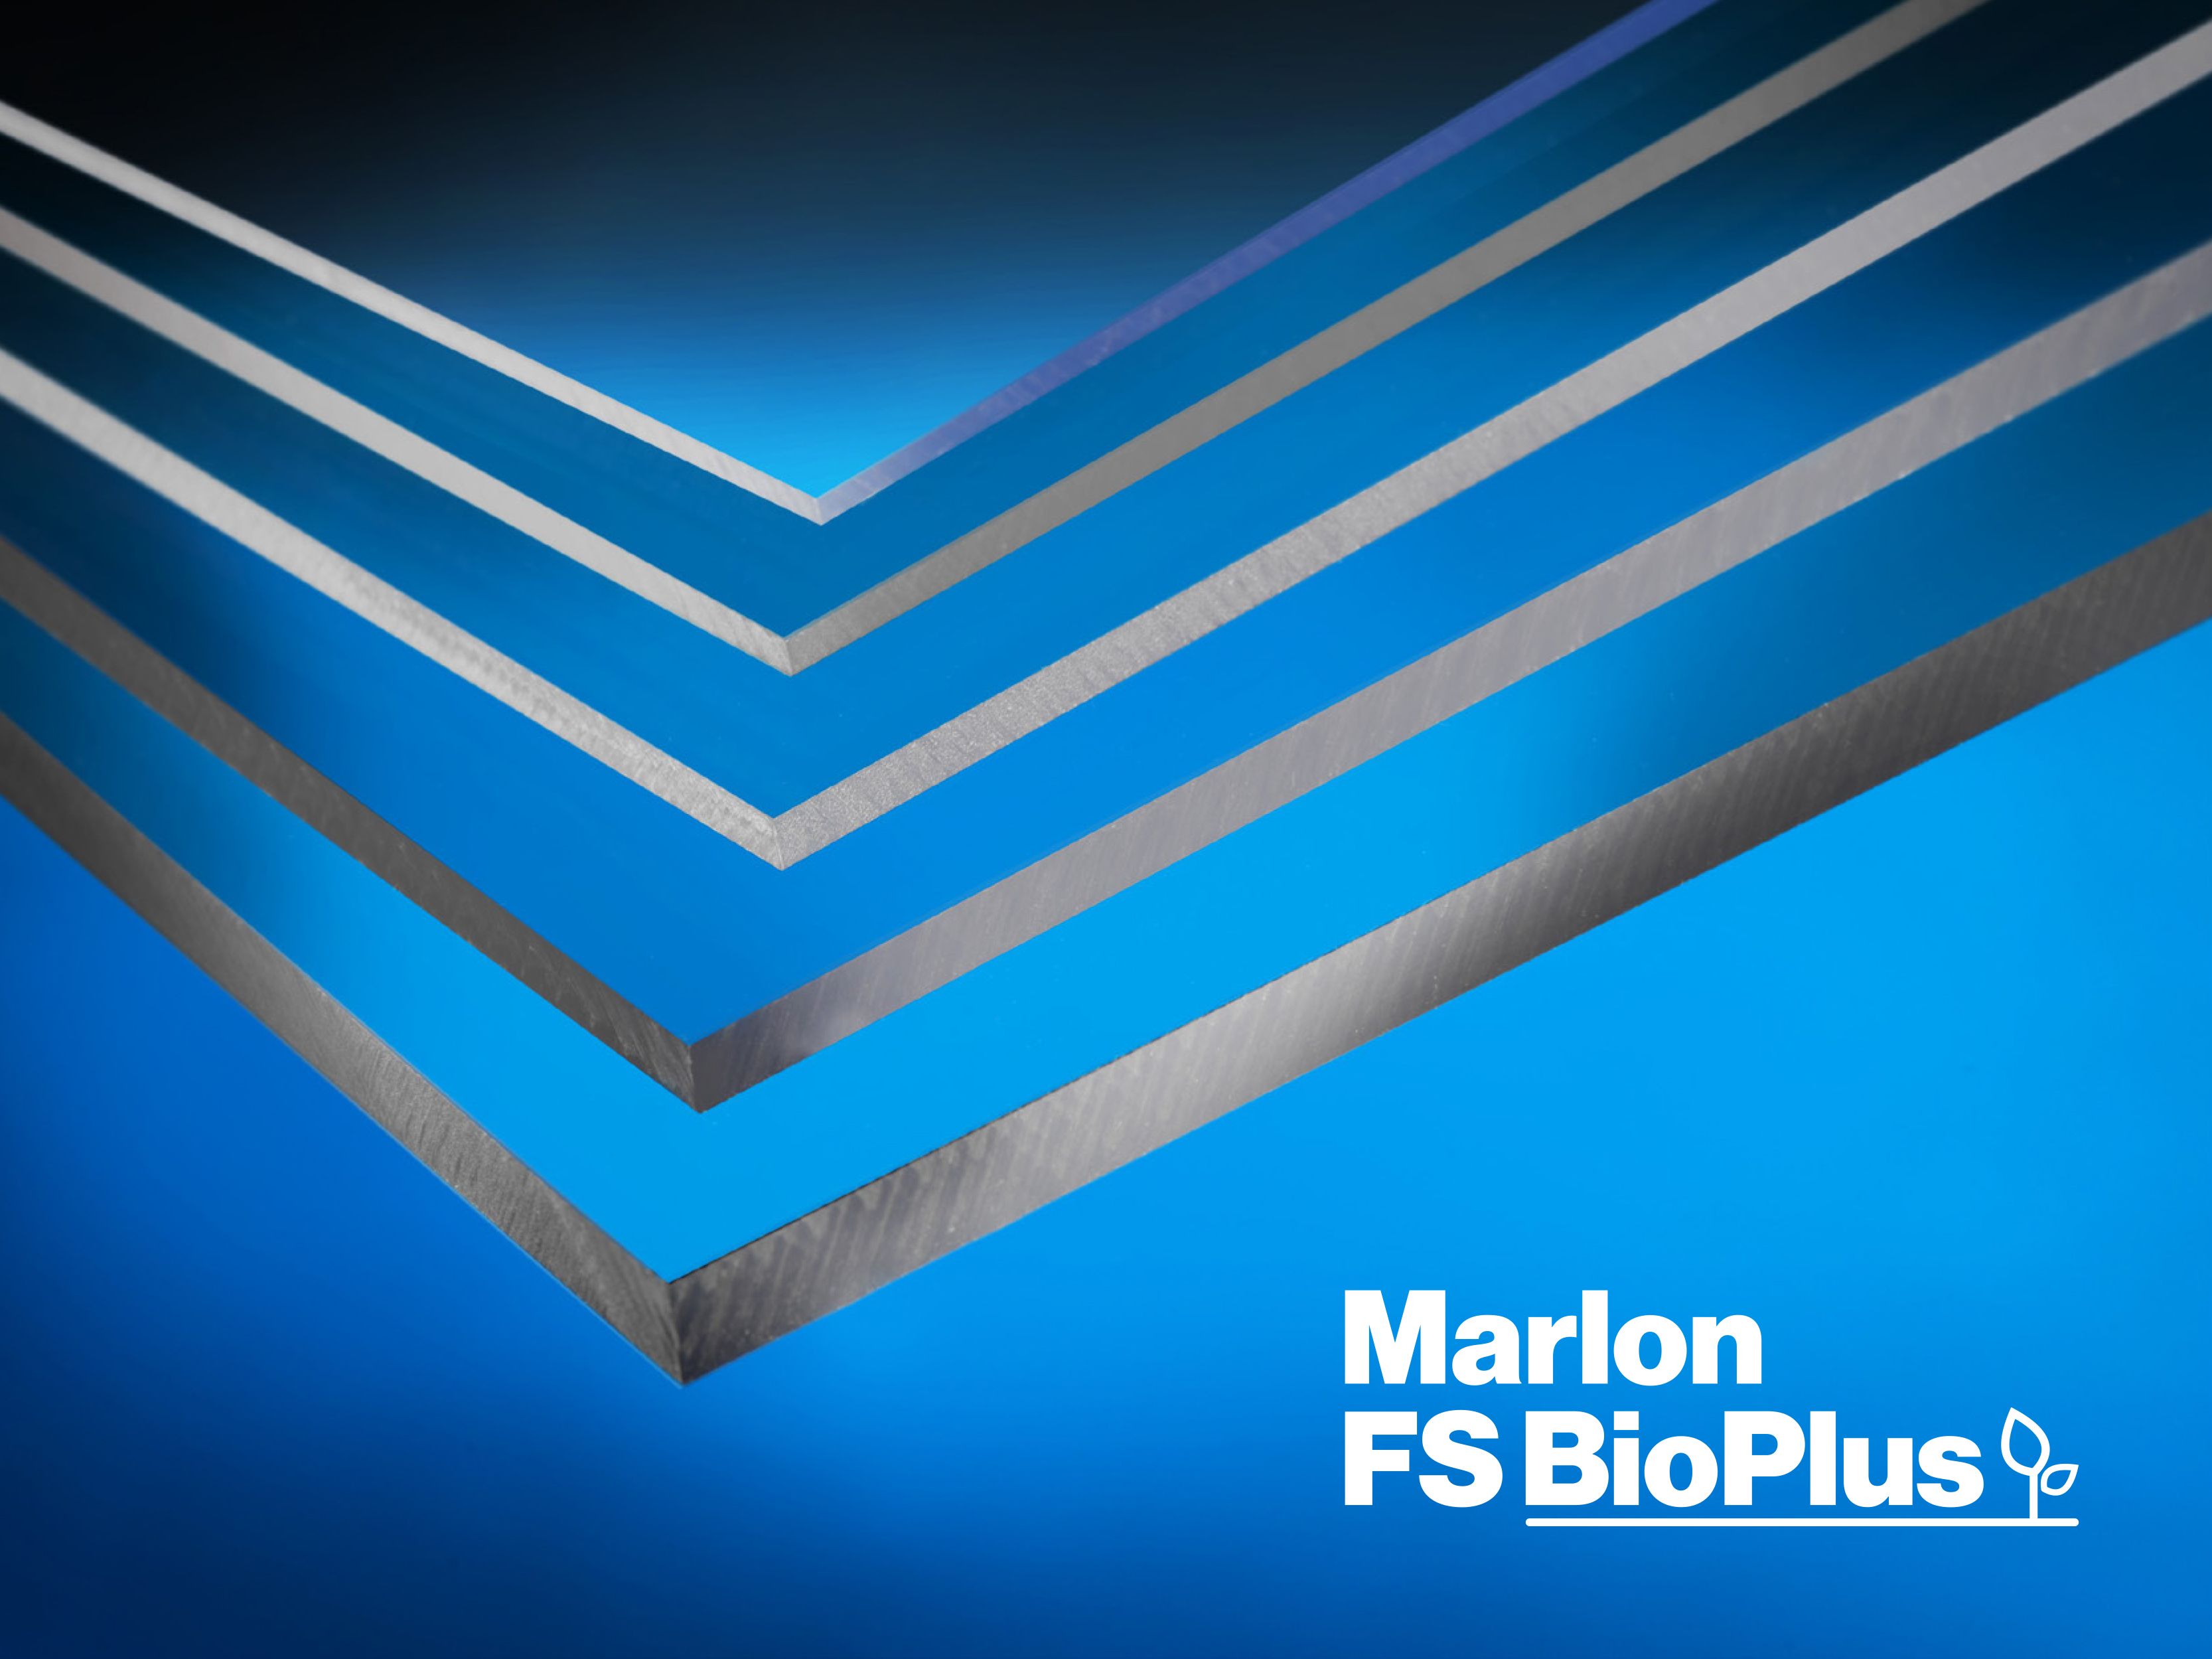 Brett Martin enters a new era for sustainable polycarbonate sheet materials